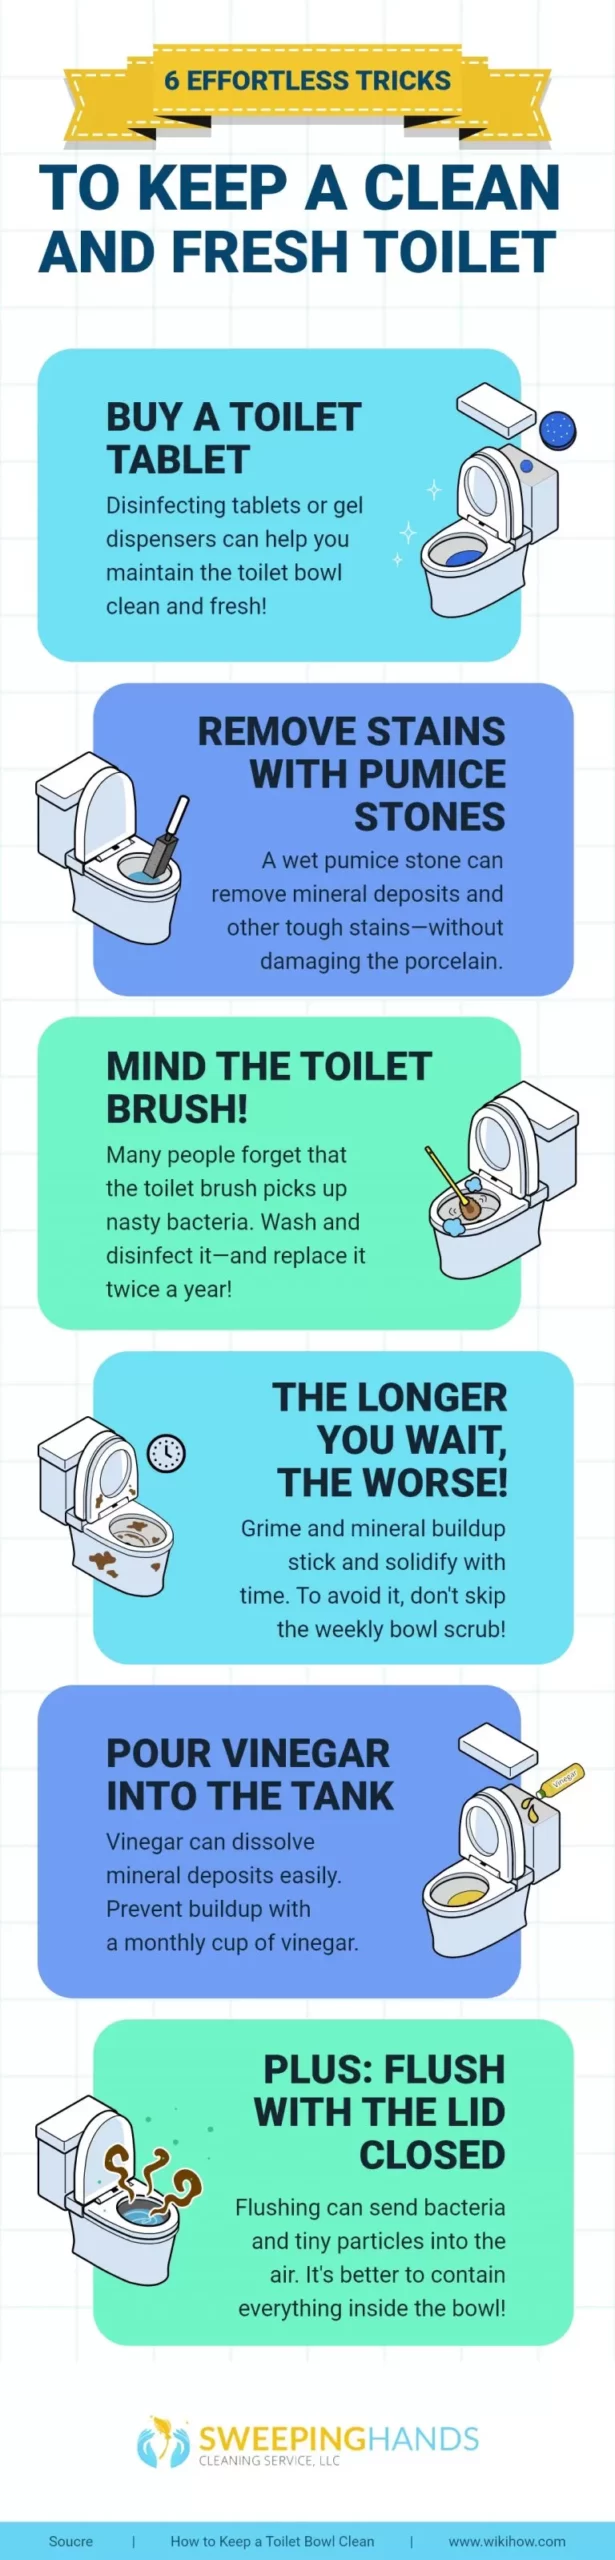 Clean And Fresh Toilet